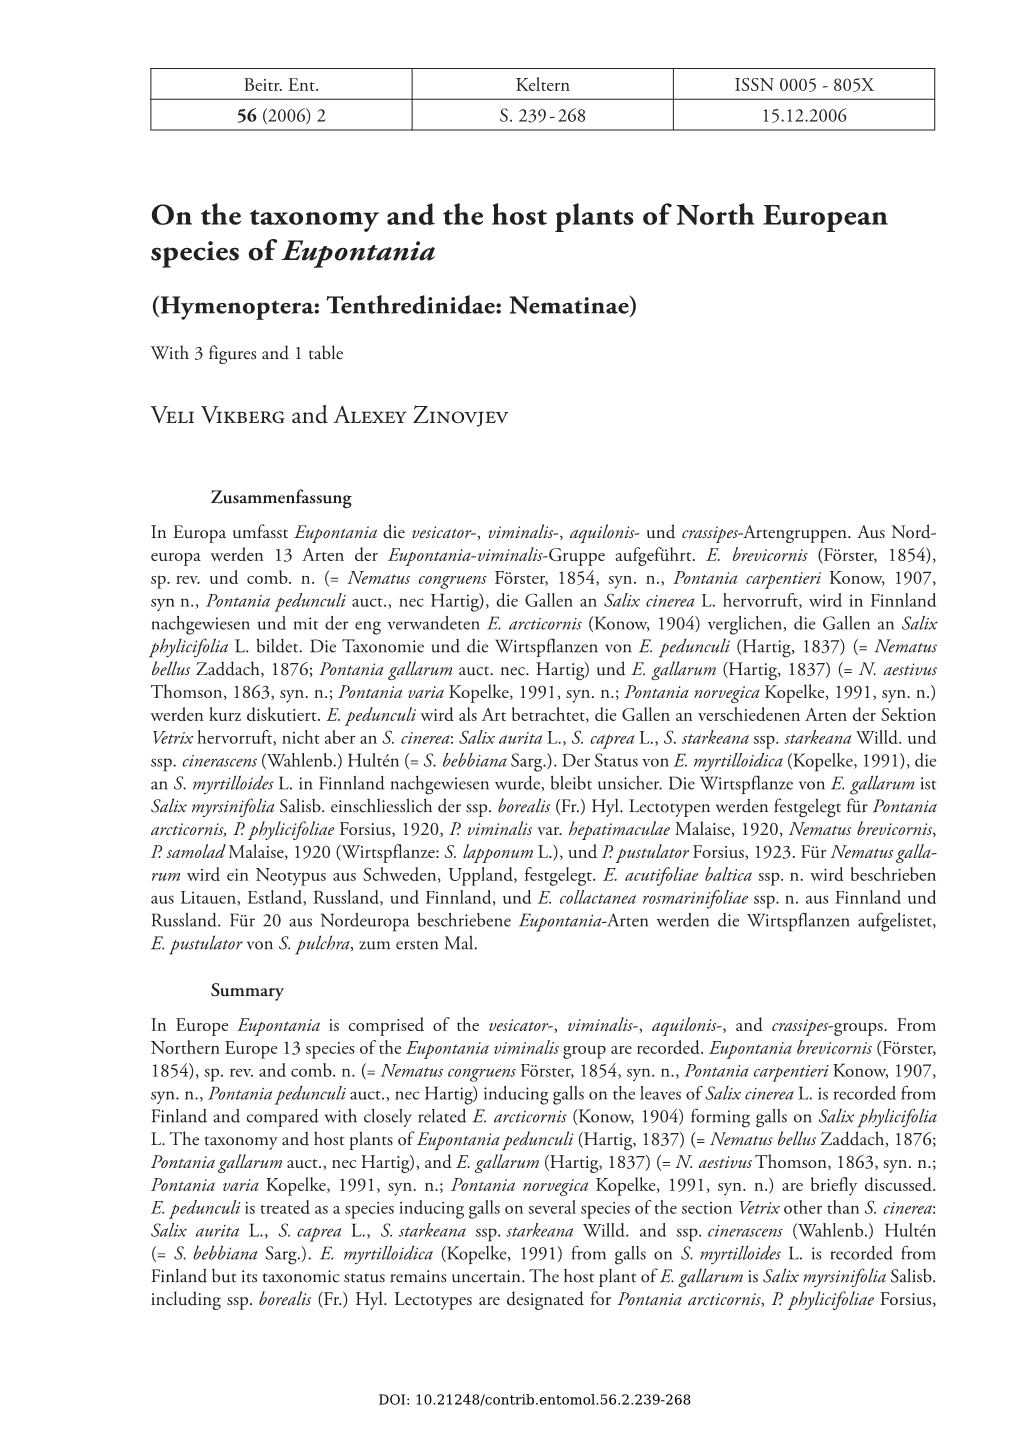 On the Taxonomy and the Host Plants of North European Species of Eupontania